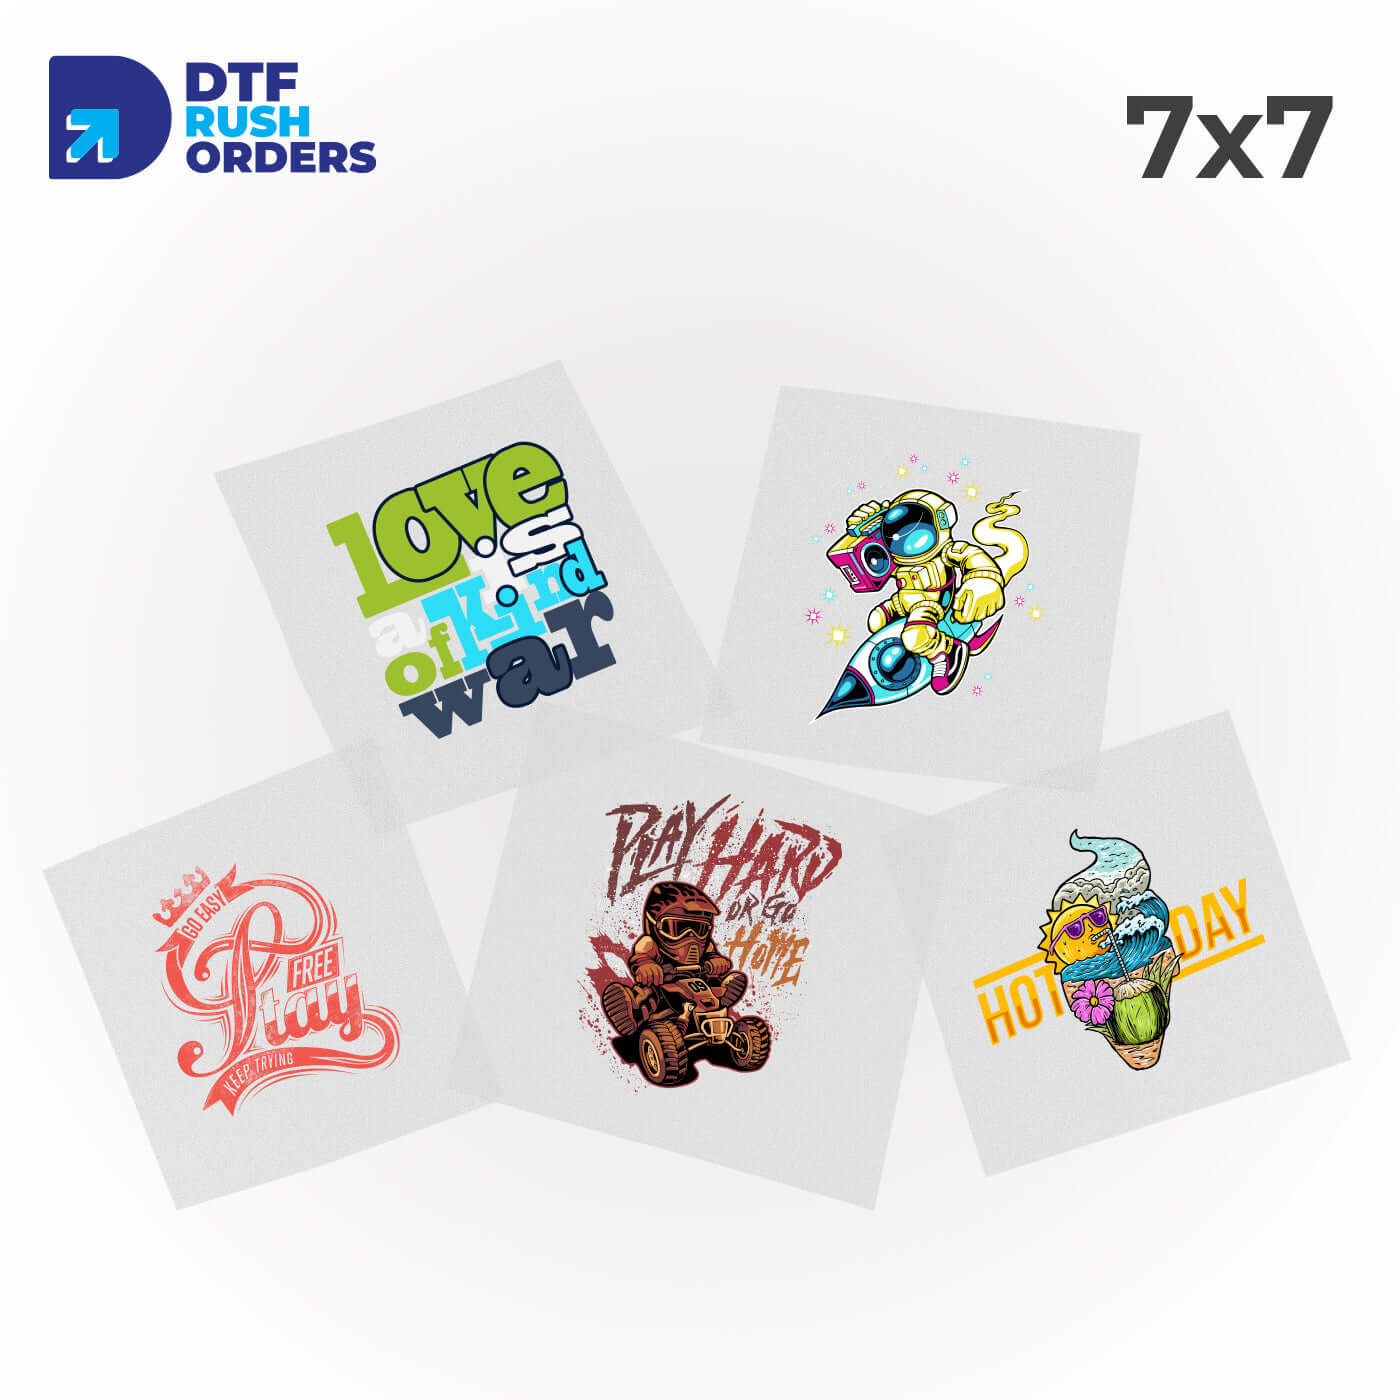 Fast and easy to order custom 7"x7" DTF Transfers Now available at DTF Rush orders